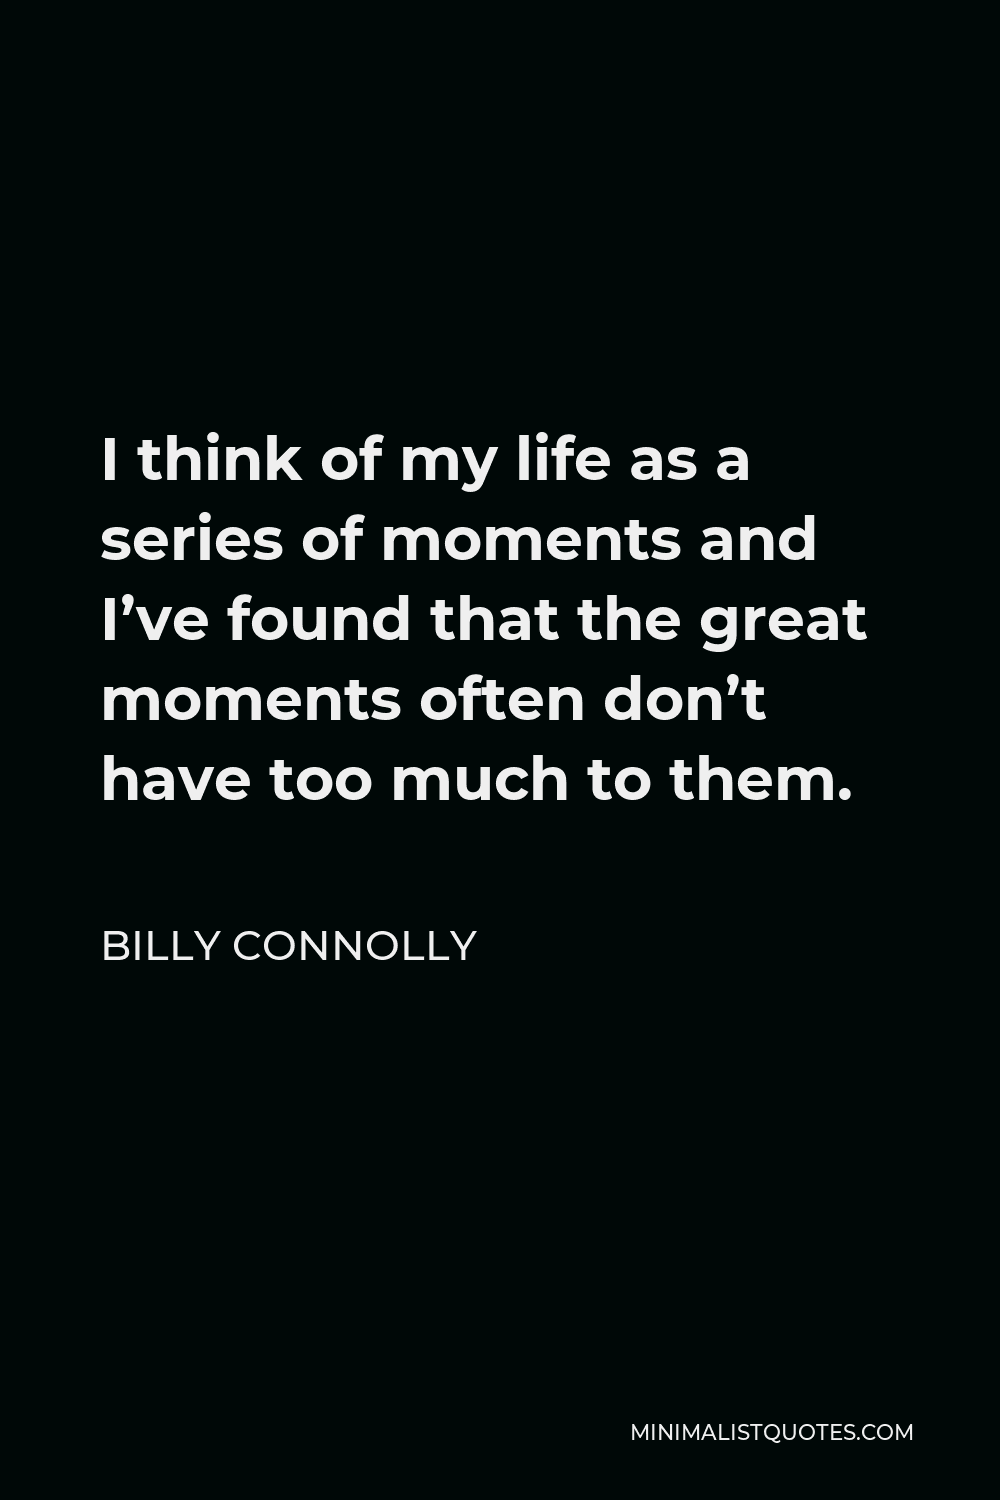 Billy Connolly Quote - I think of my life as a series of moments and I’ve found that the great moments often don’t have too much to them.